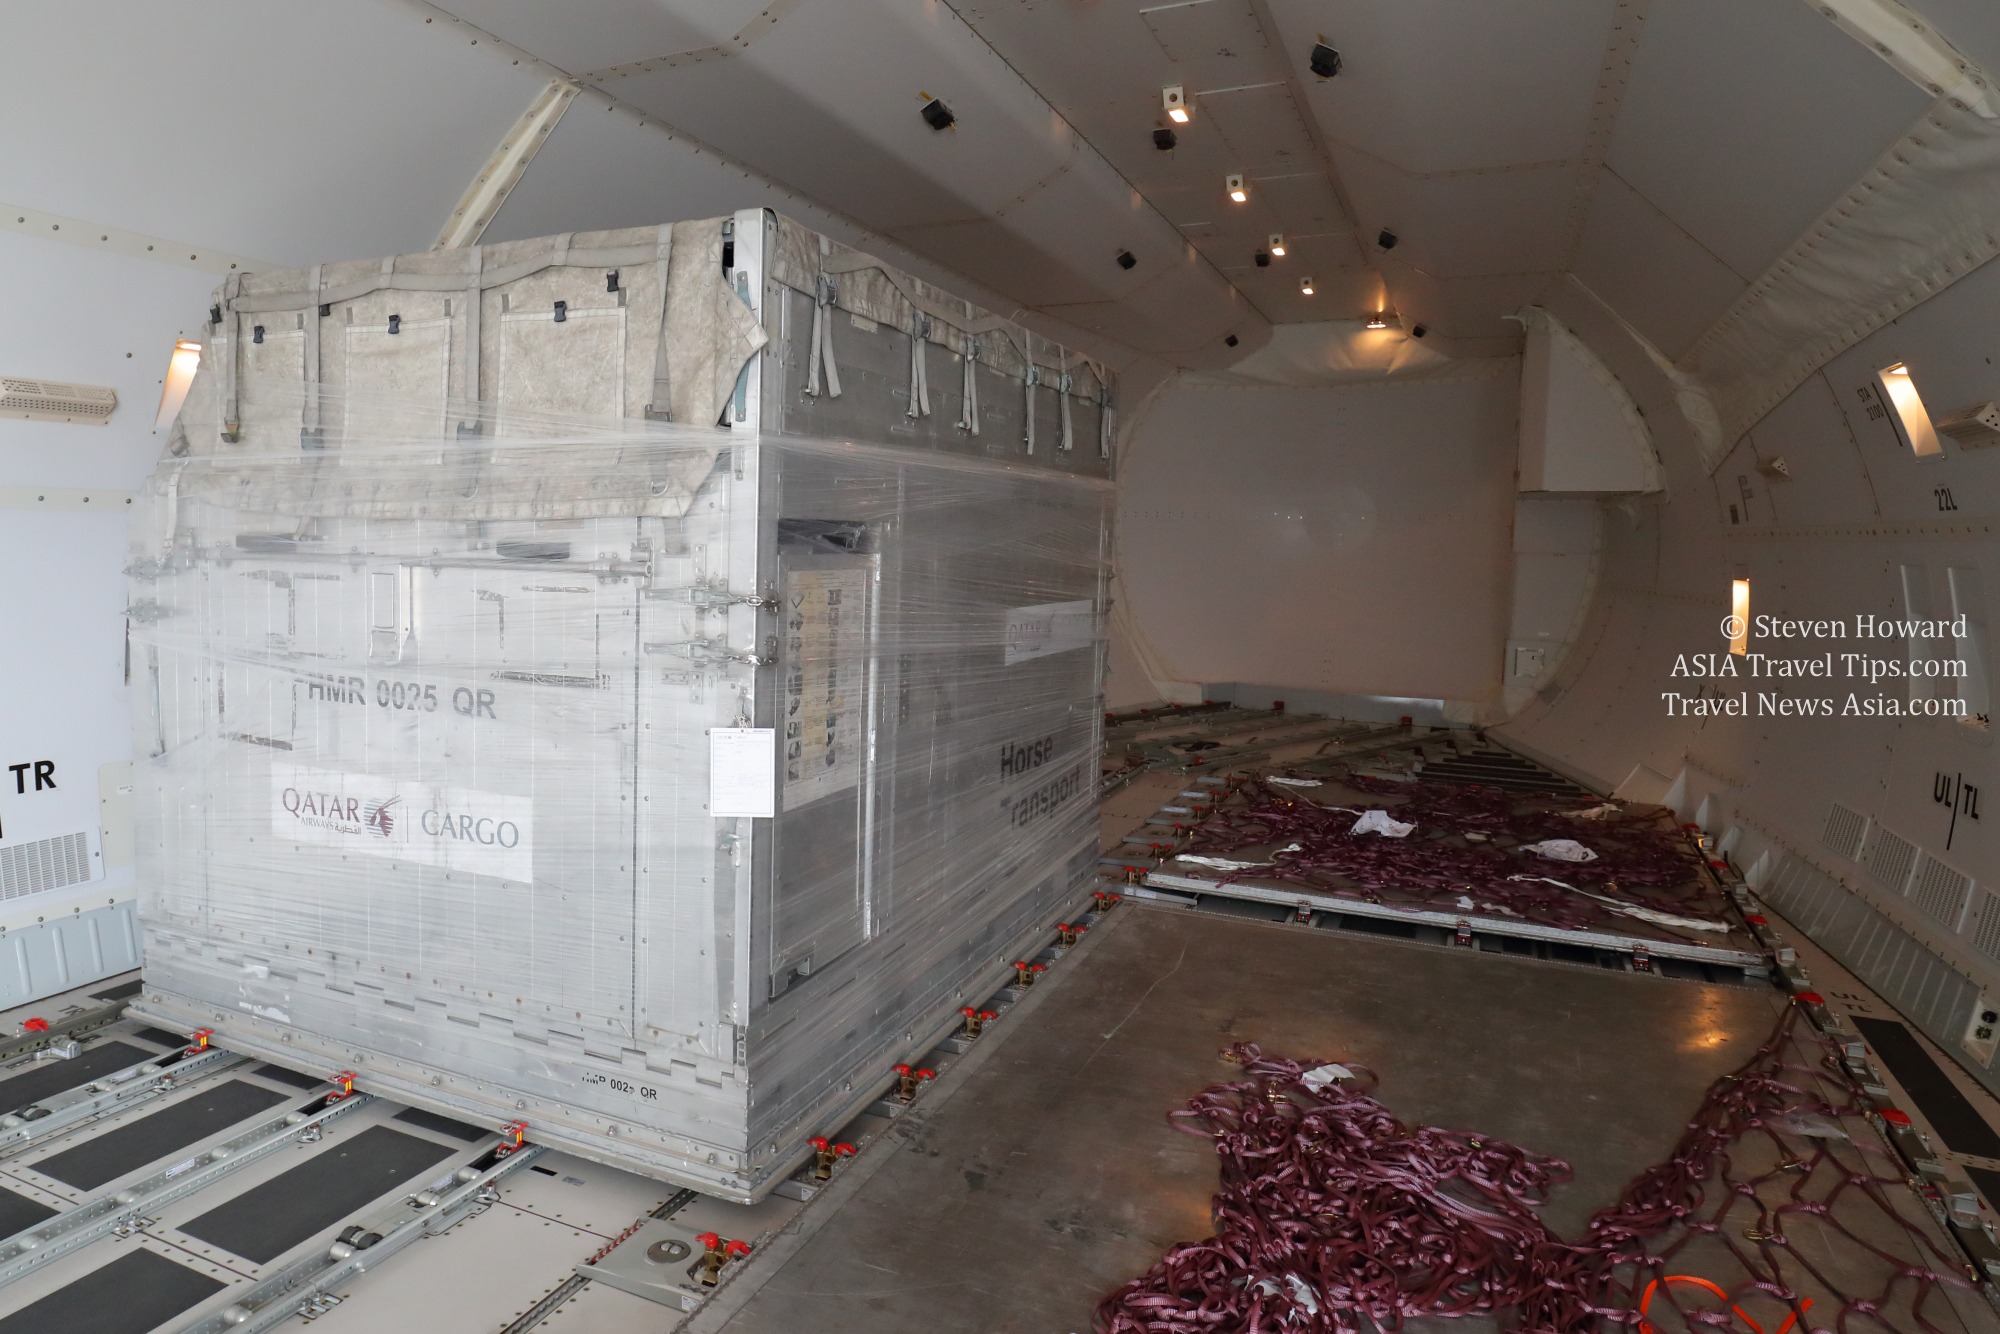 Cargo container onboard a Qatar Airways Boeing 747F. Picture by Steven Howard of TravelNewsAsia.com Click to enlarge.